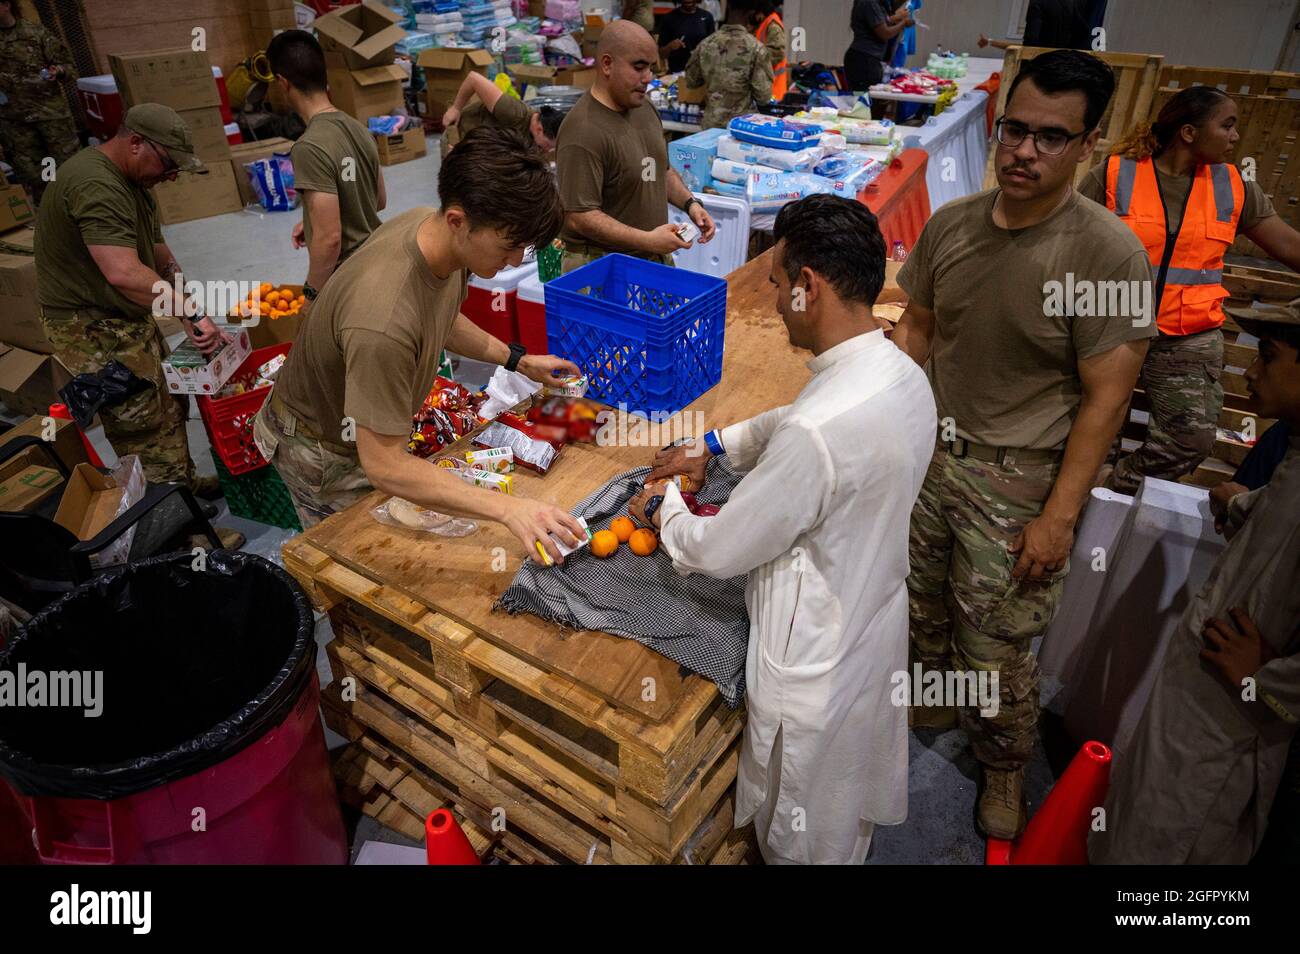 Al Udeied Air Base, Qatar. 23rd Aug, 2021. U.S. Air Force airmen provide food to Afghan refugees on arrival from Kabul August 23, 2021 at Al Udeied Air Base, Qatar. Credit: Planetpix/Alamy Live News Stock Photo